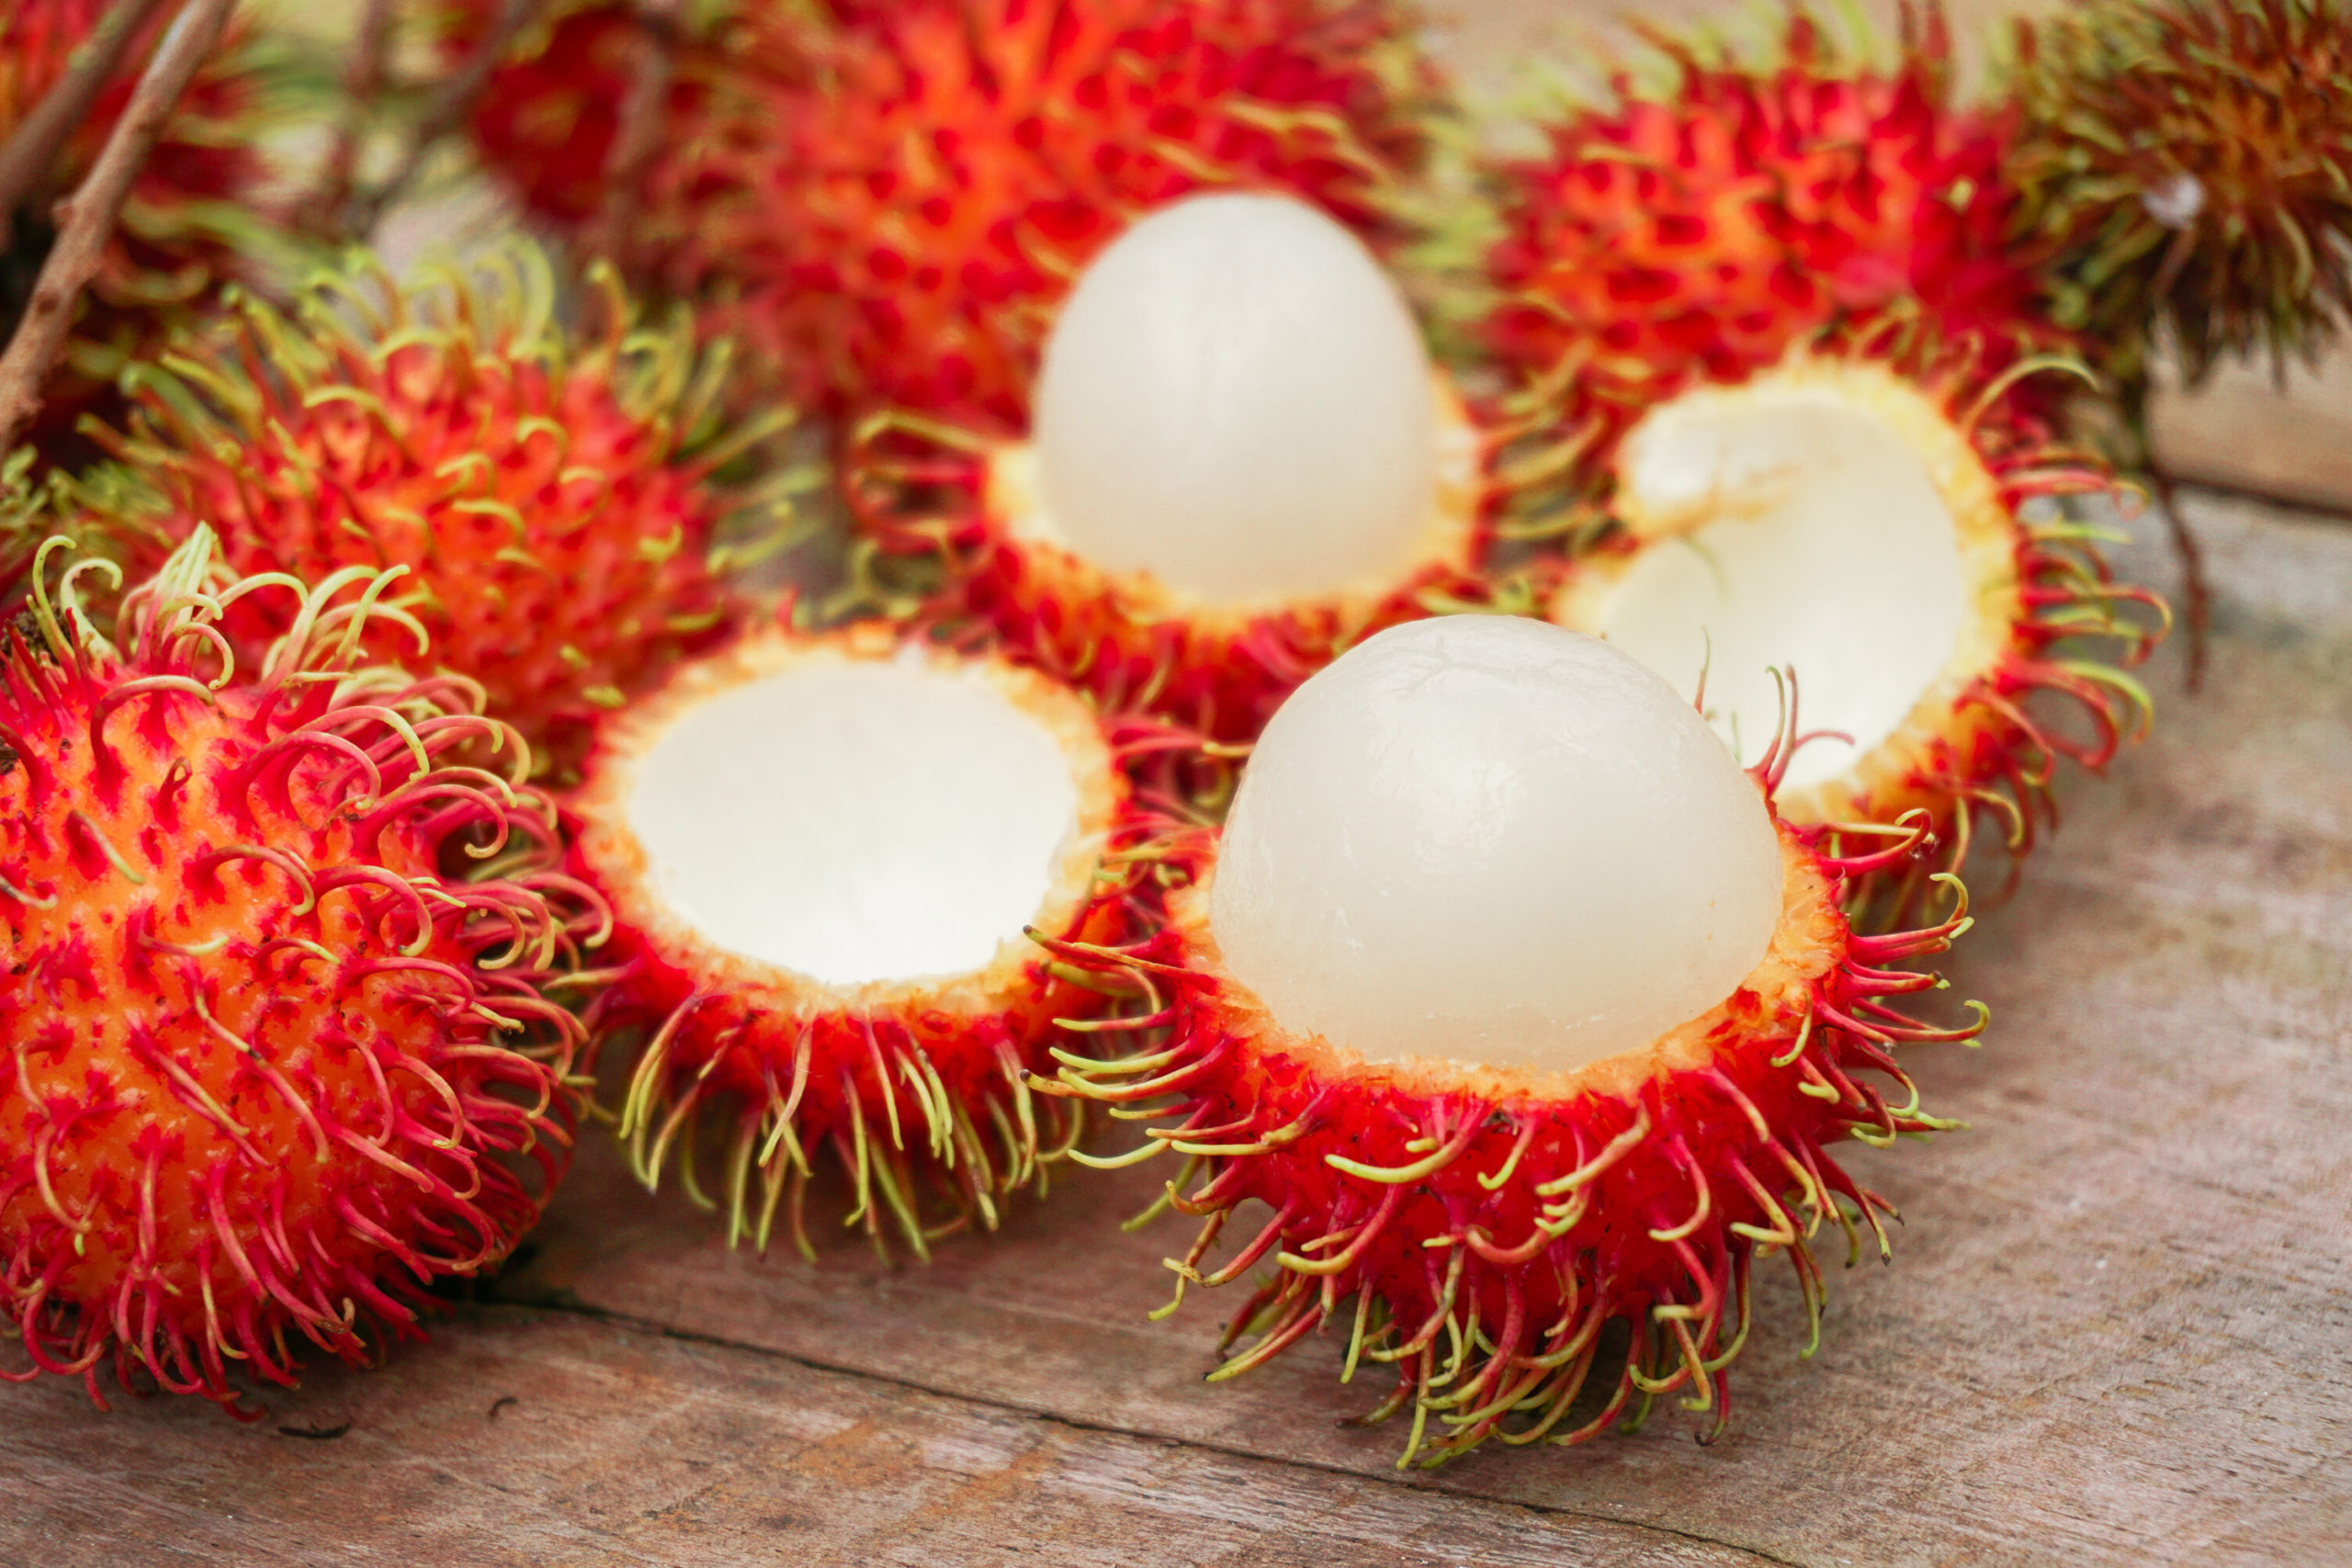 10 Mysterious Fruits You Never Knew Existed